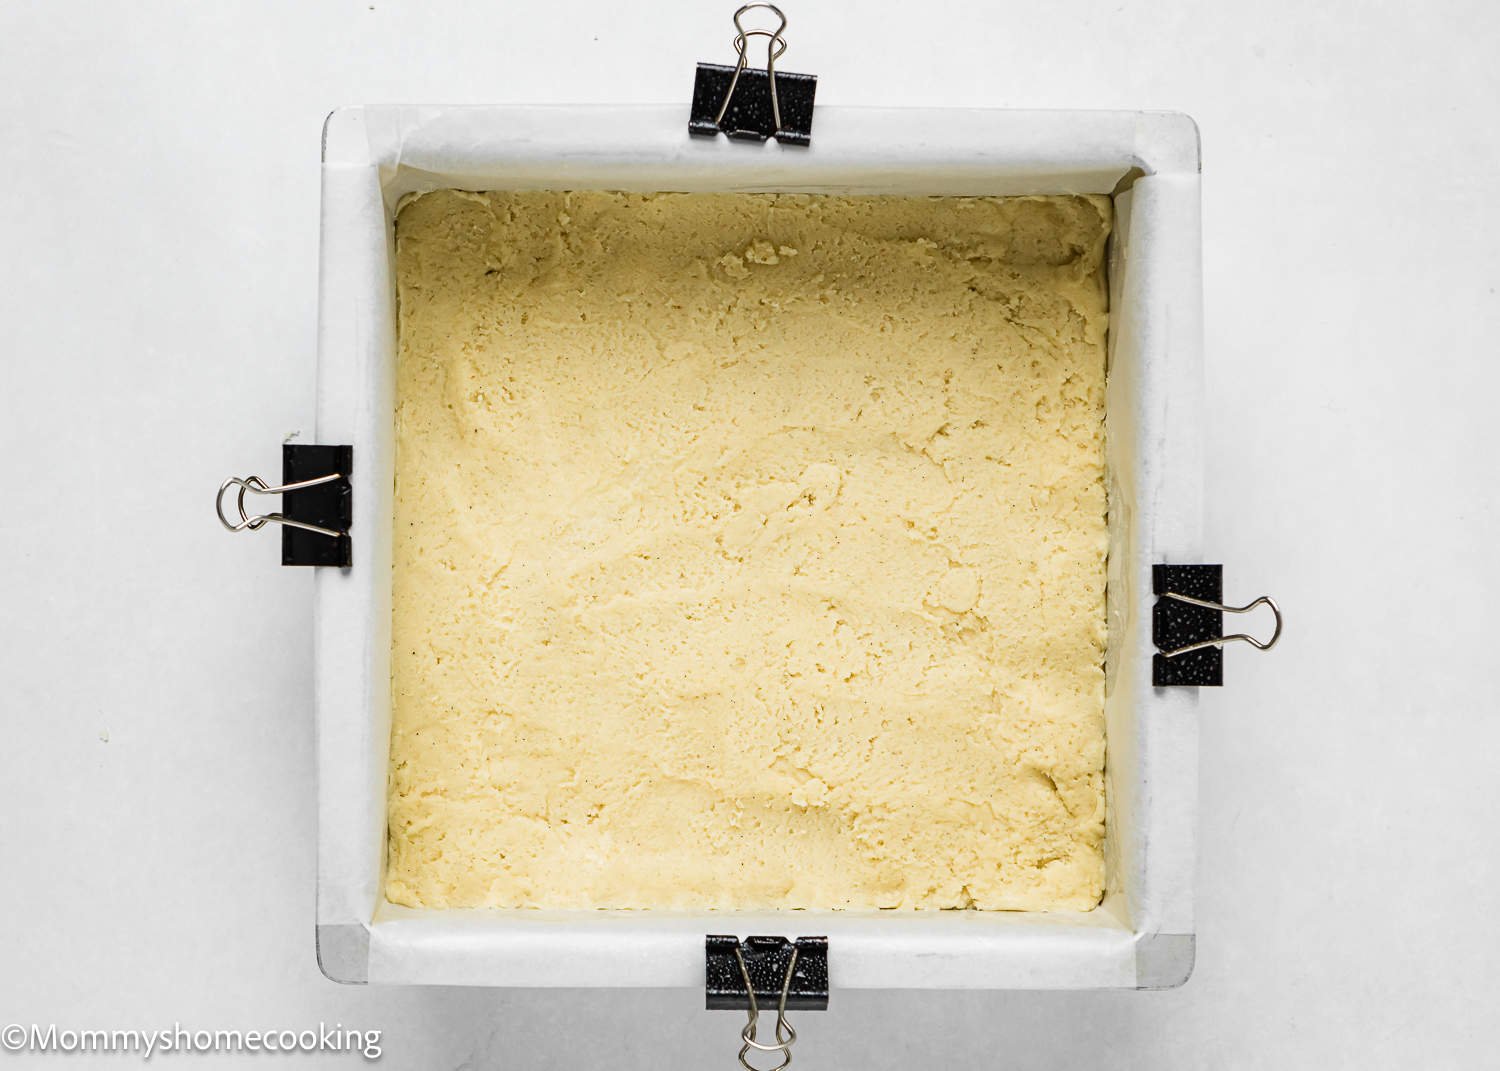 un baked egg-free sugar cookie dough in a square baking pan.